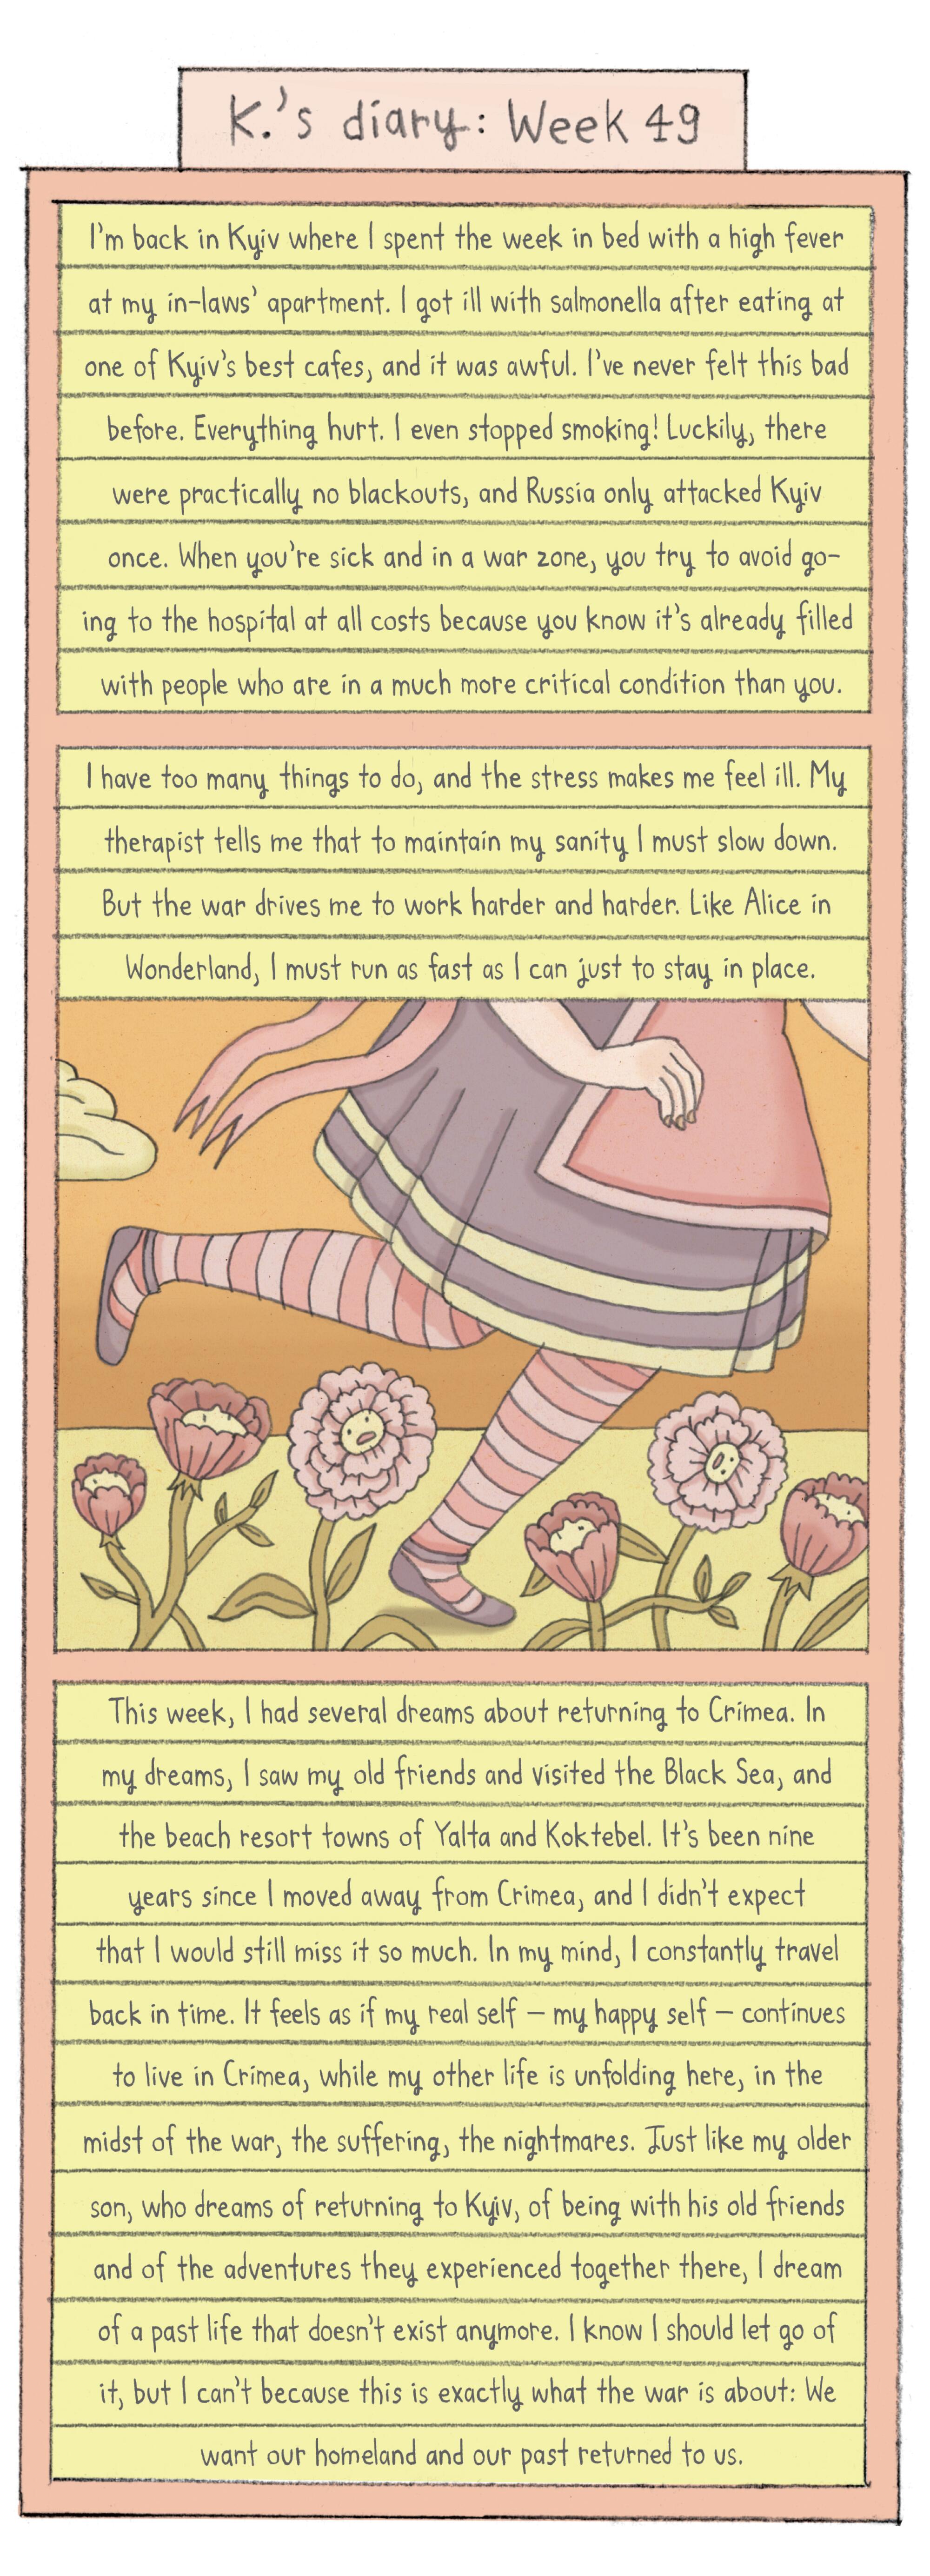 view of a girl, cropped at the legs in striped stockings, running in a field of flowers with faces in them.